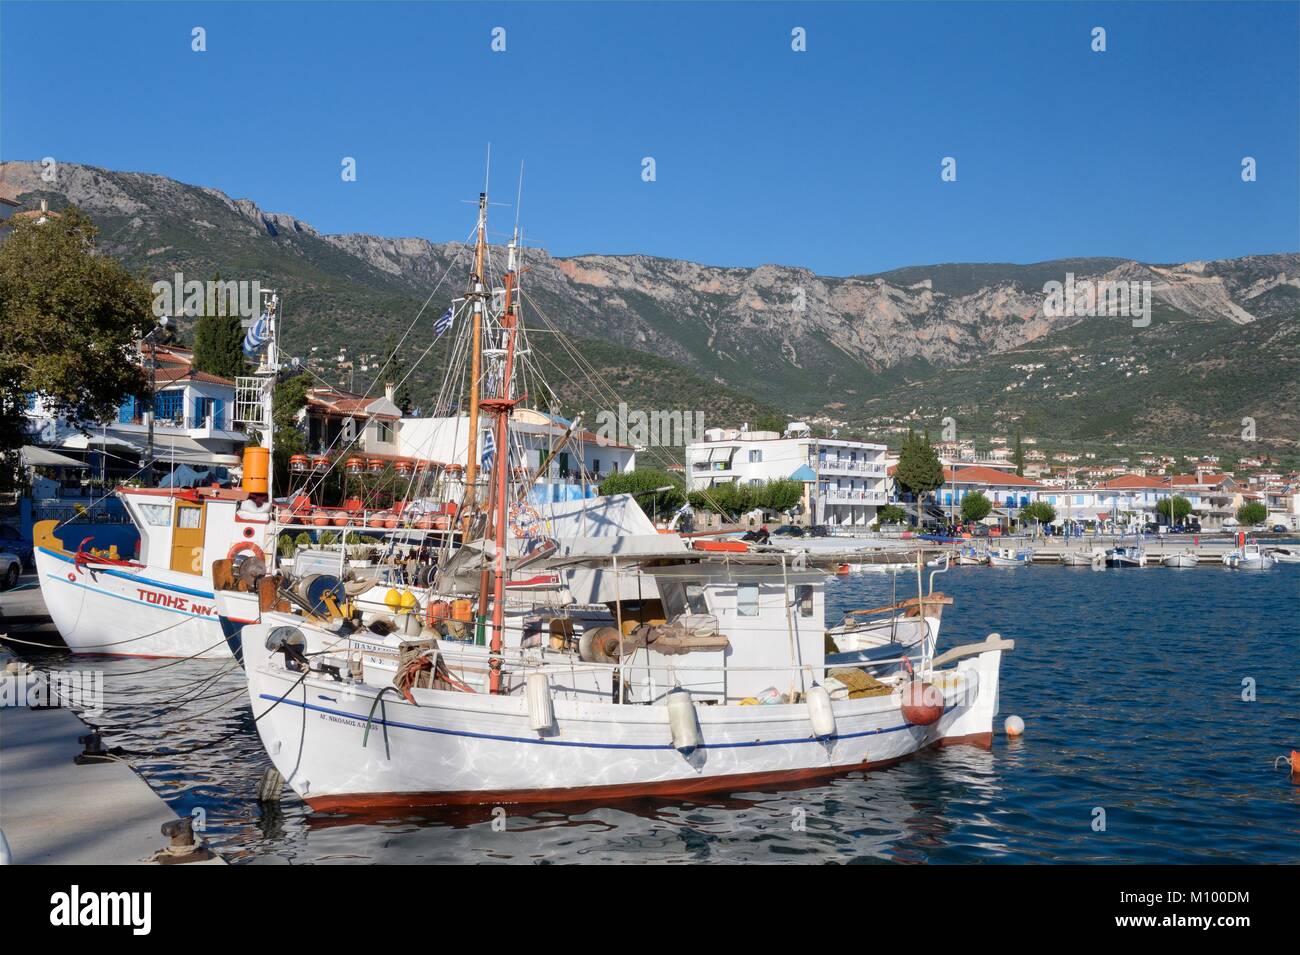 Fishing boats moored in Tyros harbour with Tyros village and mountains of Arcadia in the background, Peloponnese, Greece, August. Stock Photo